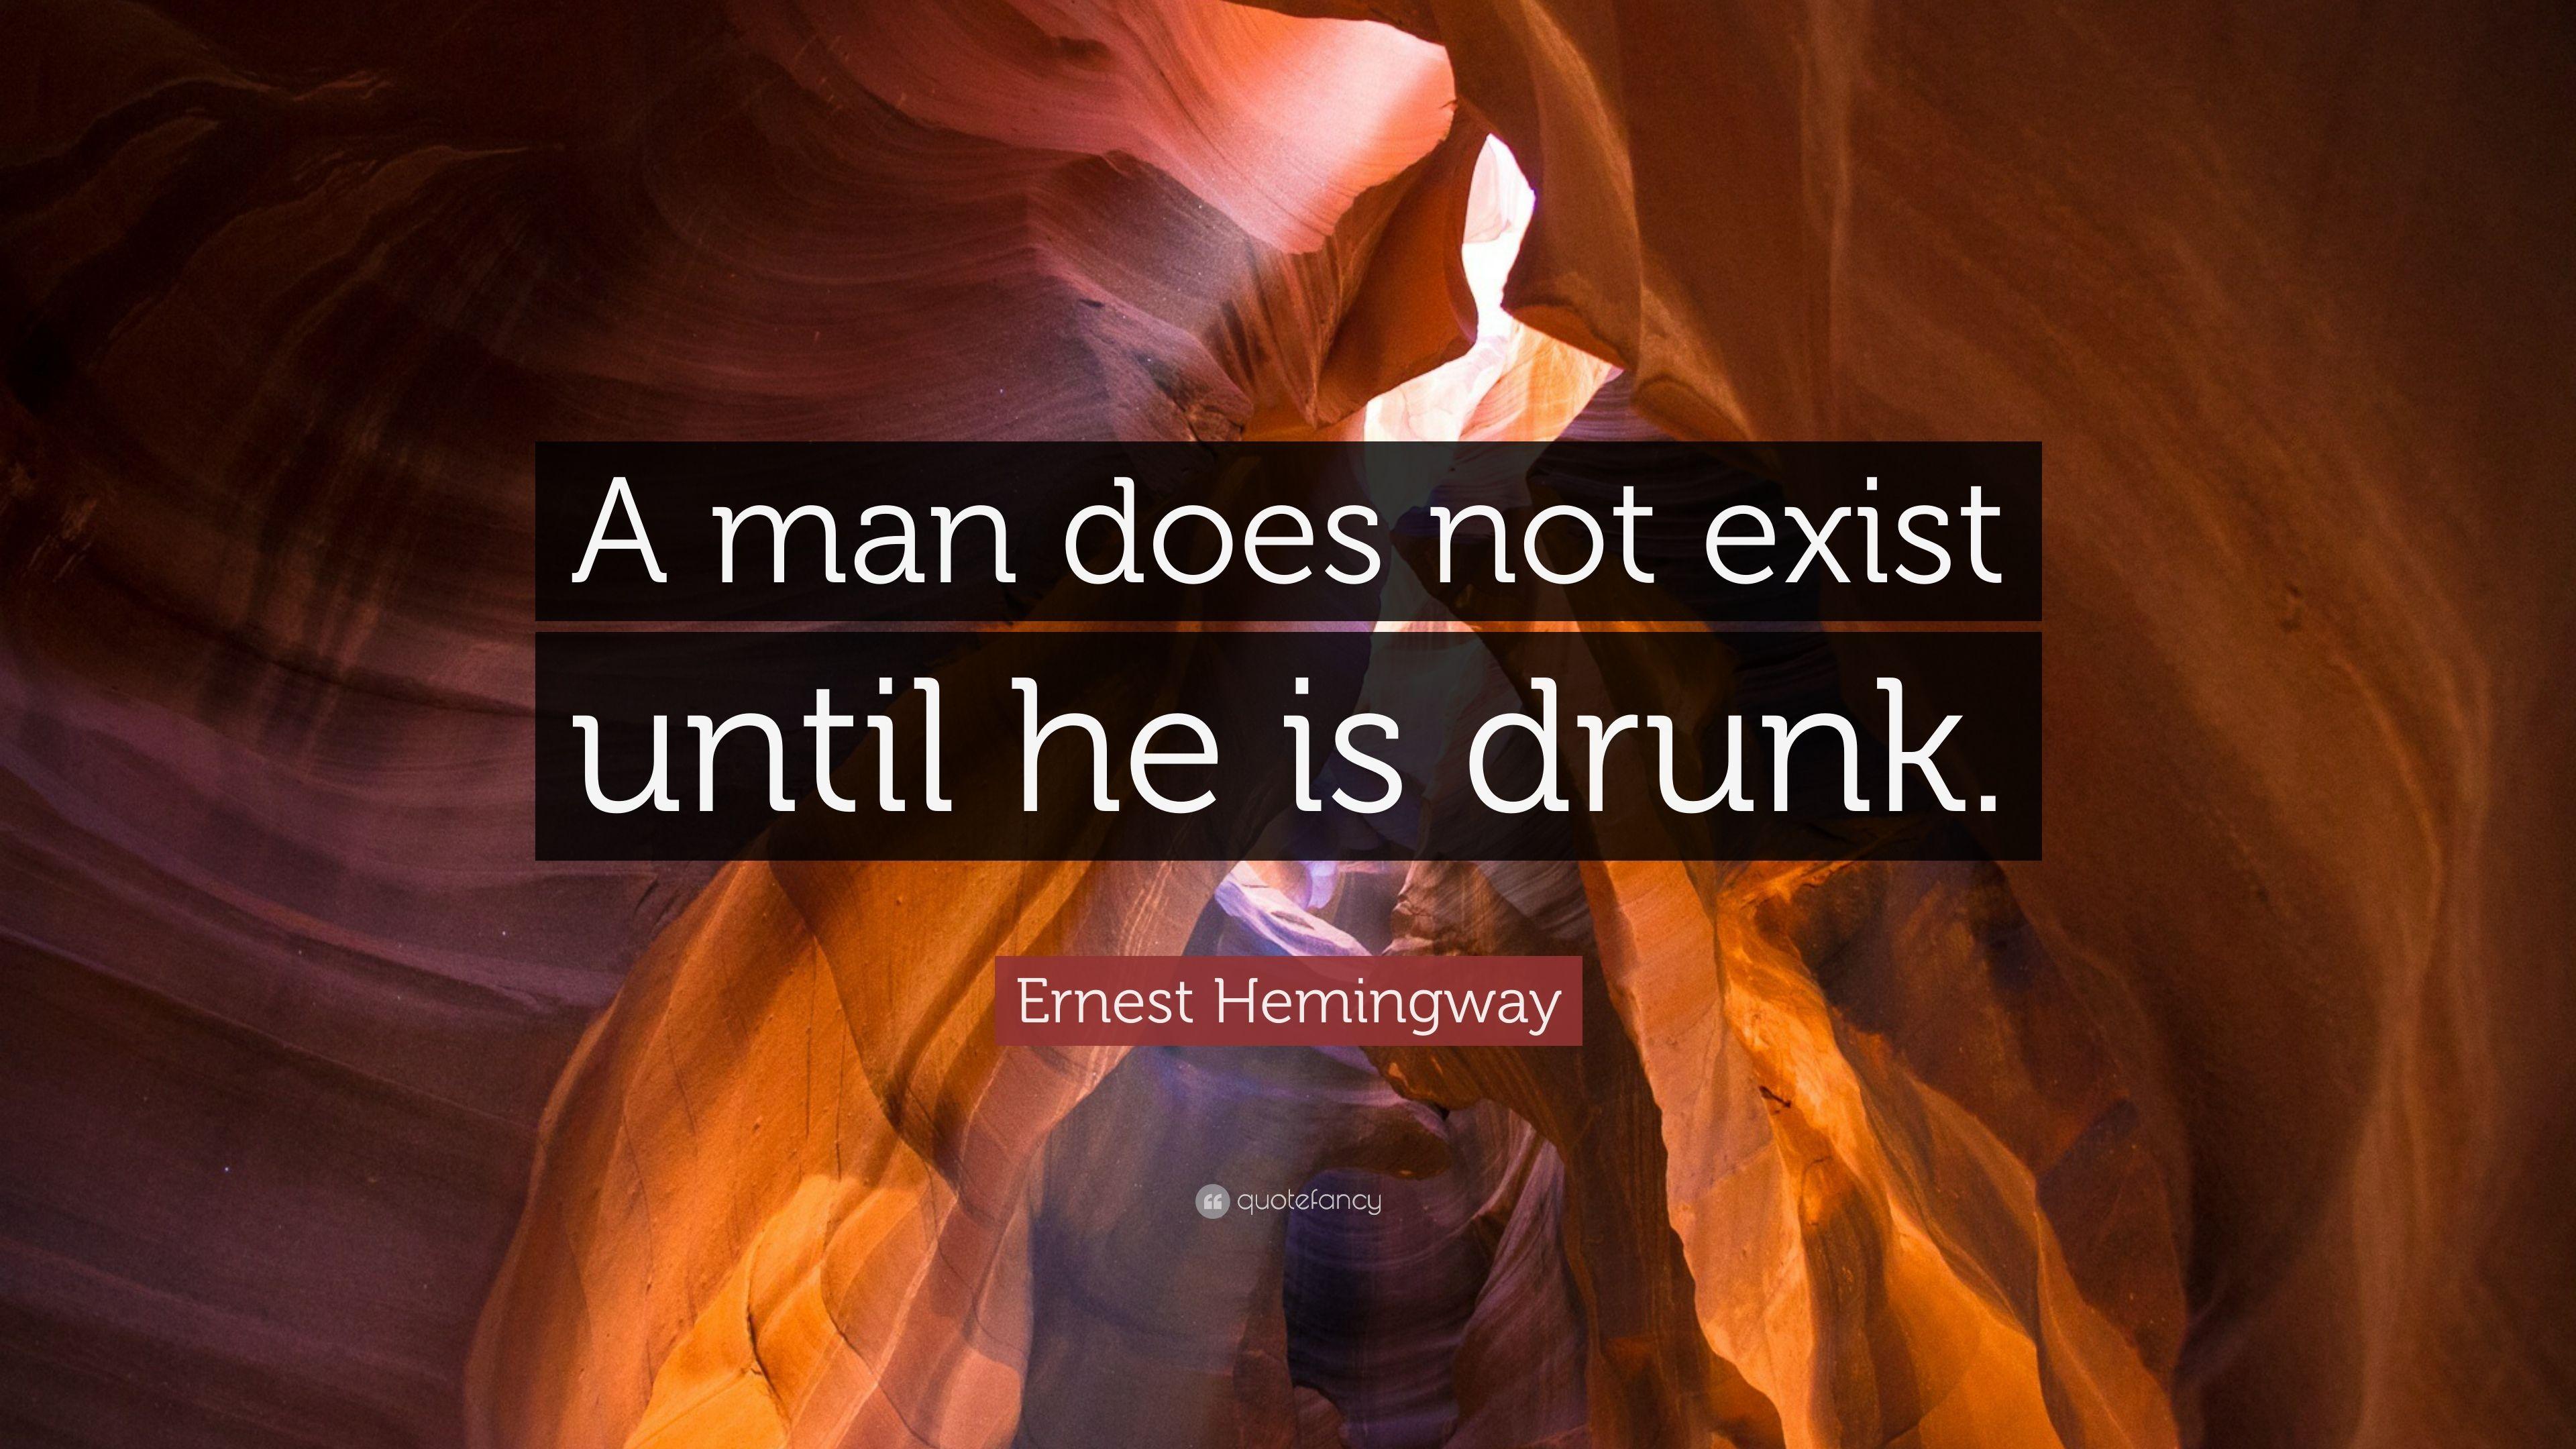 Ernest Hemingway Quote: “A man does not exist until he is drunk